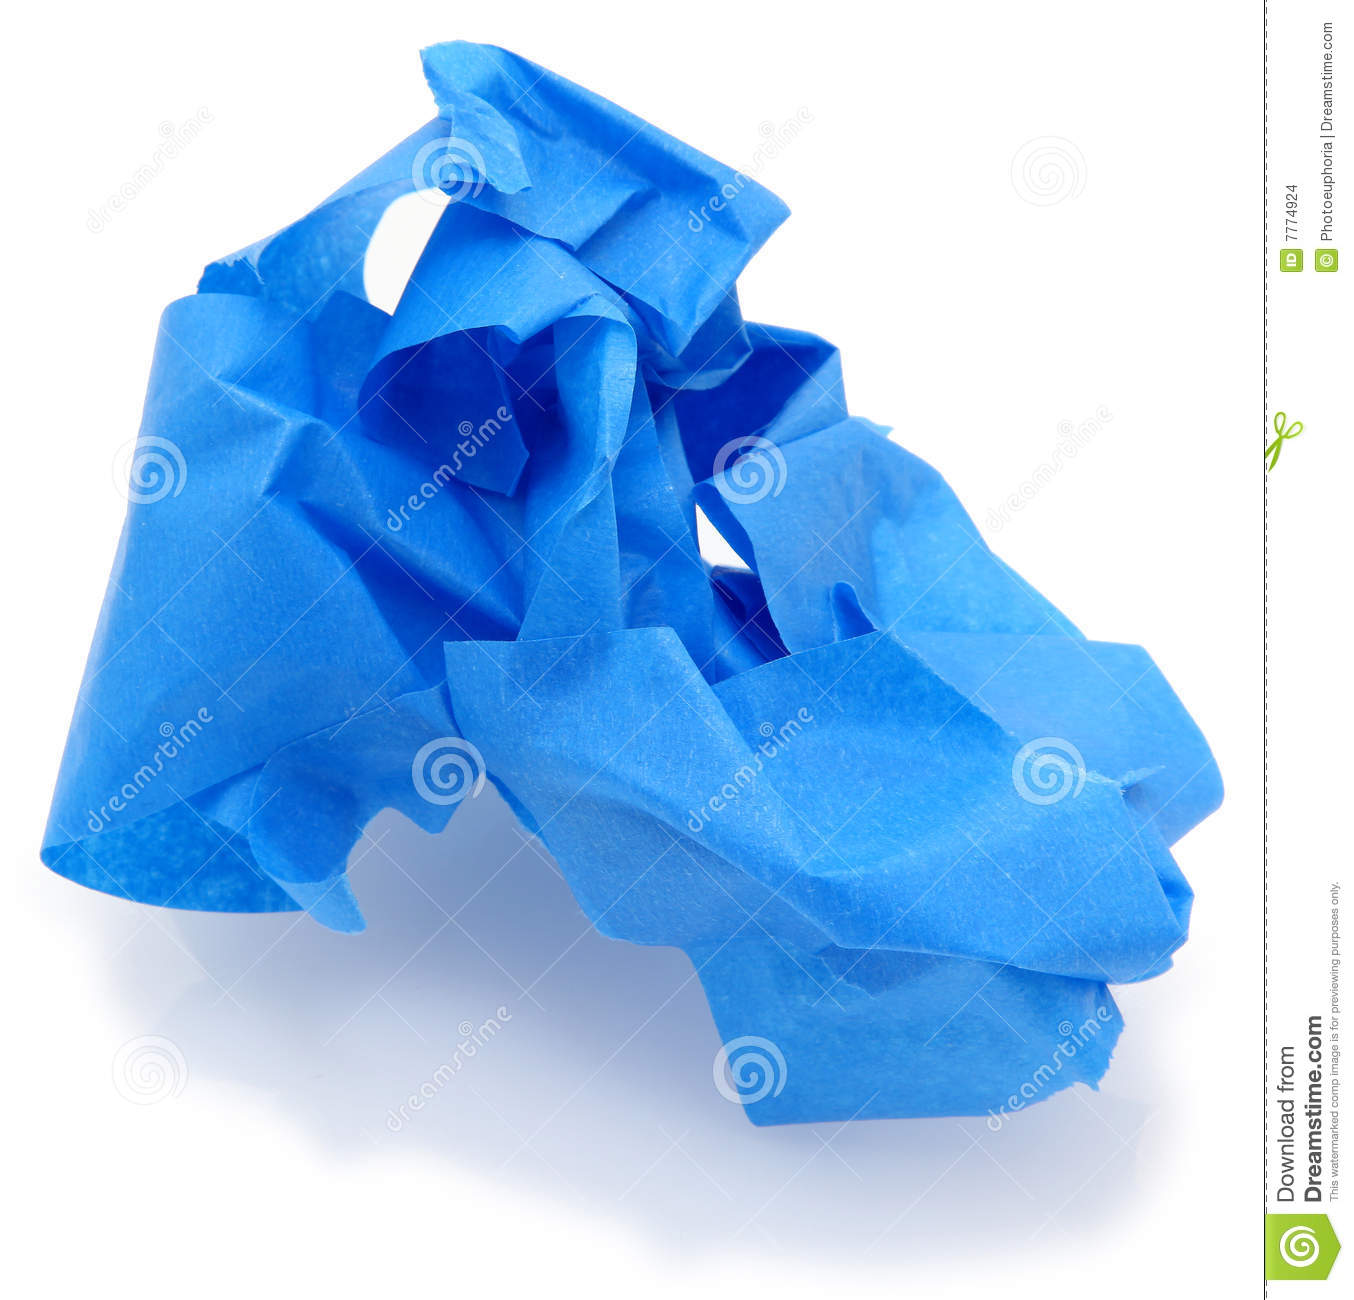 Blue Painters Tape Stock Images   Image  7774924